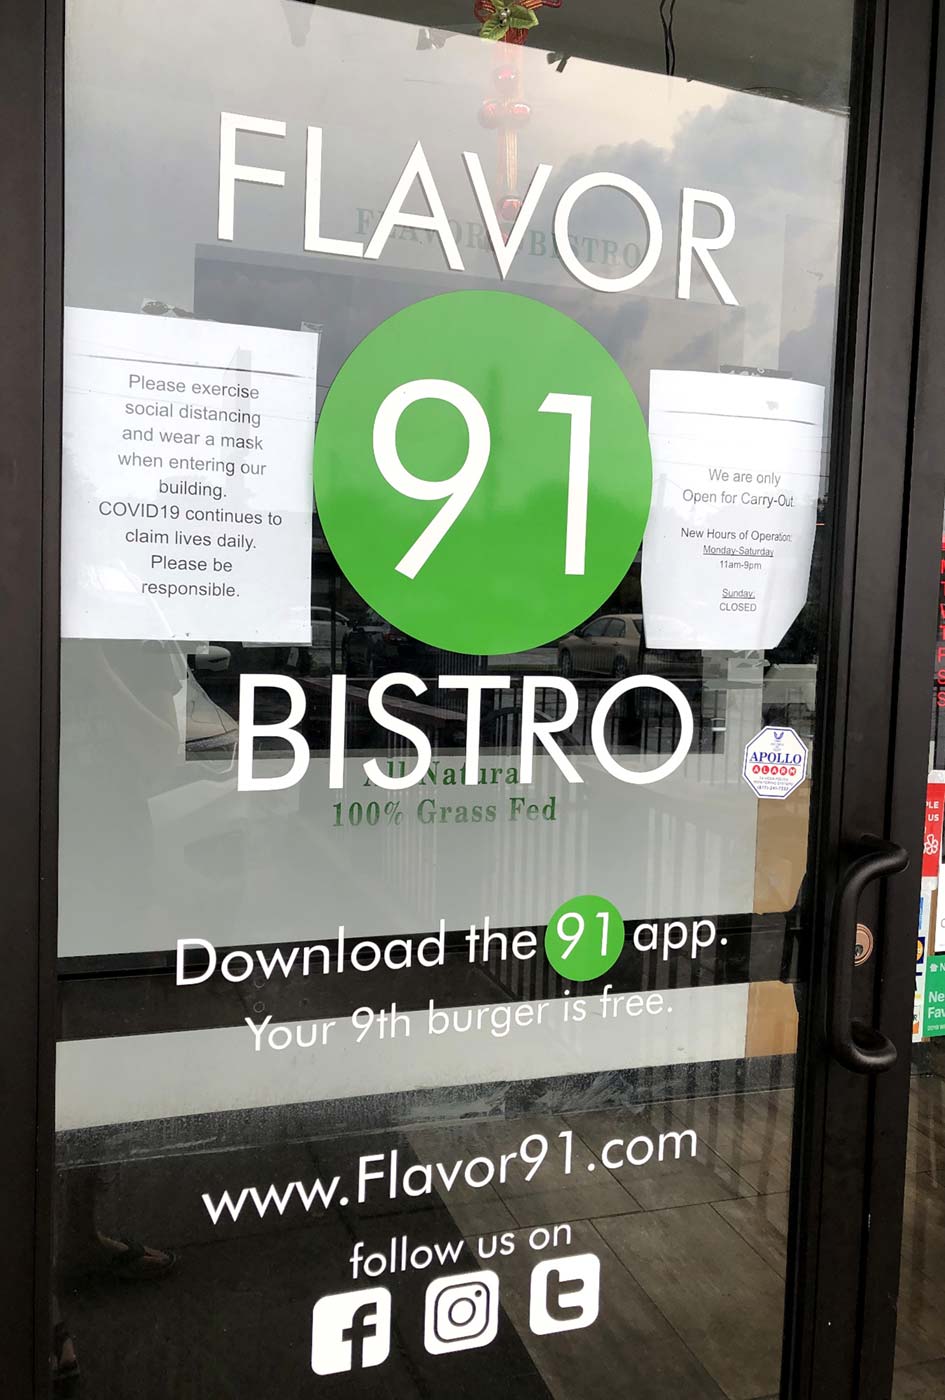 The door to Flavor 91 includes signage asking customers to maintain social distancing. Photo by Lauren Kurtz.